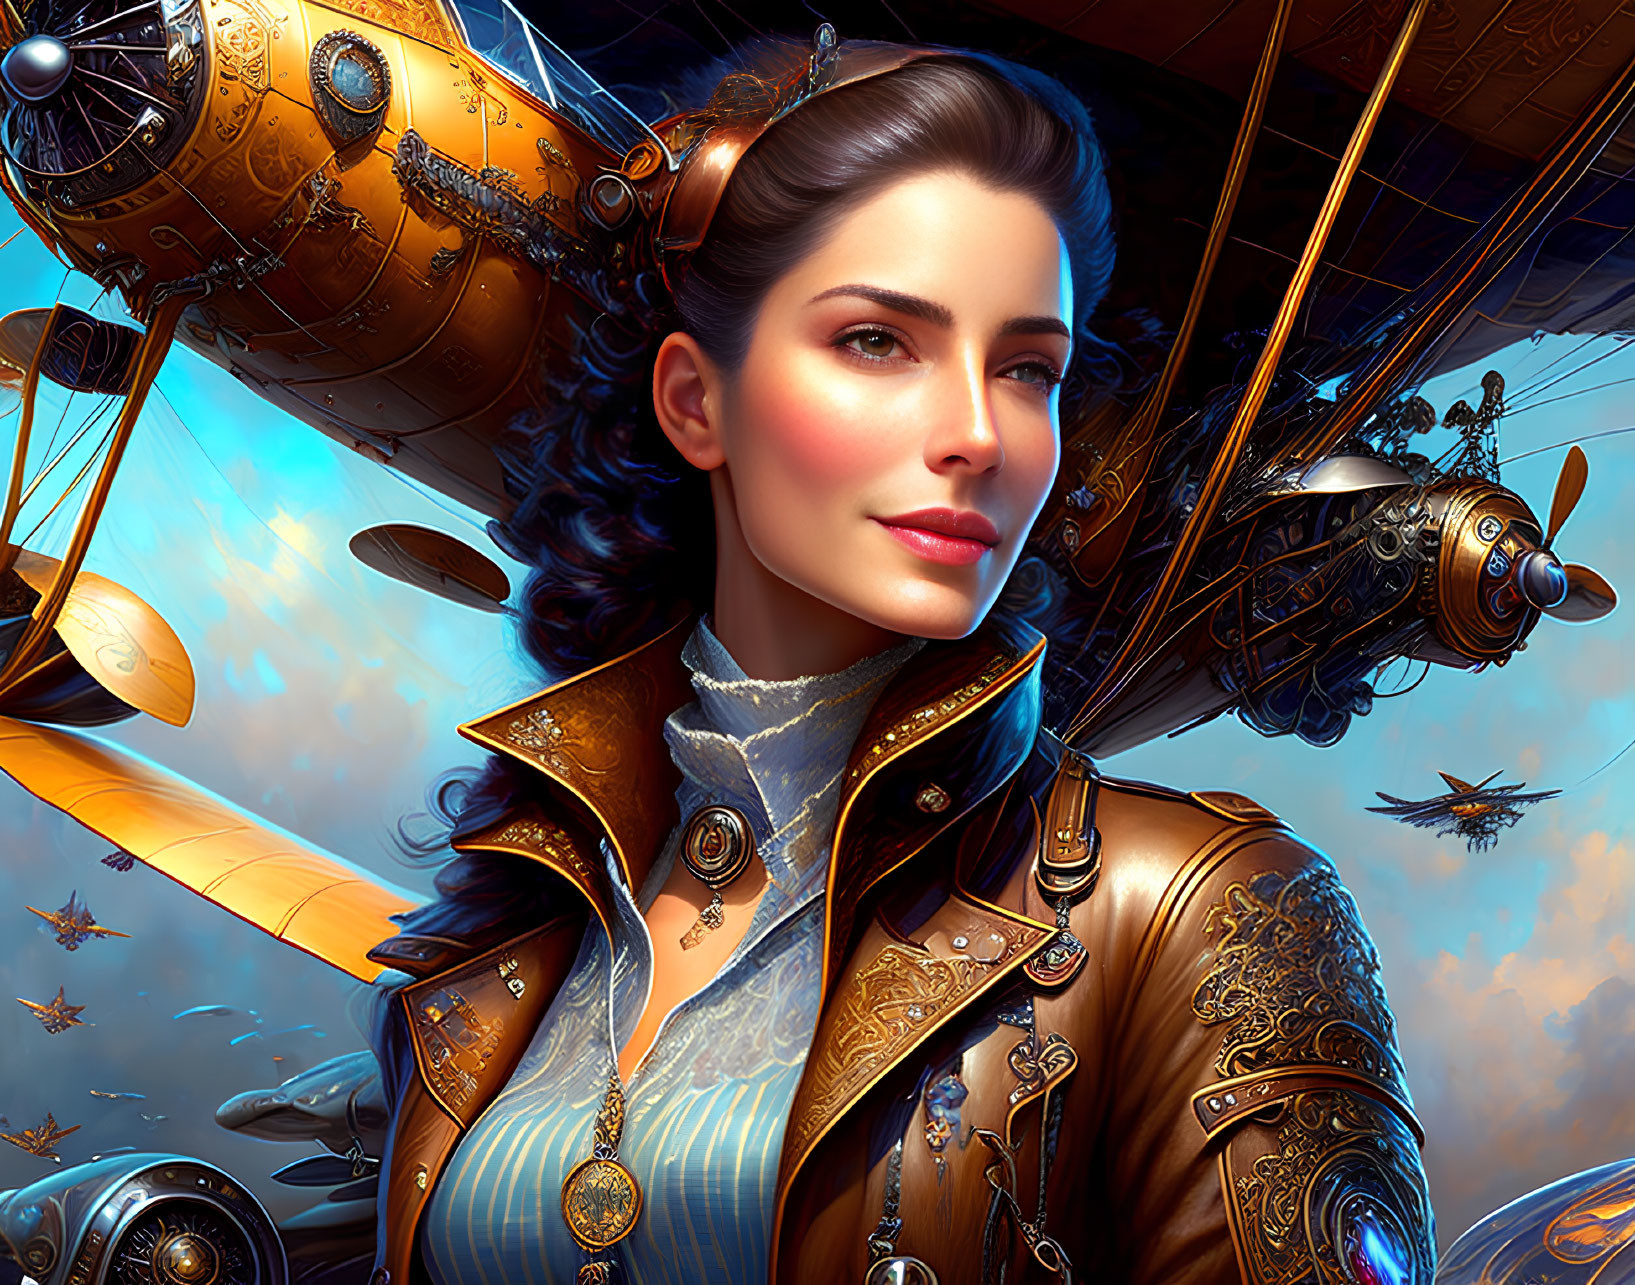 Steampunk-themed woman posing with airships in background